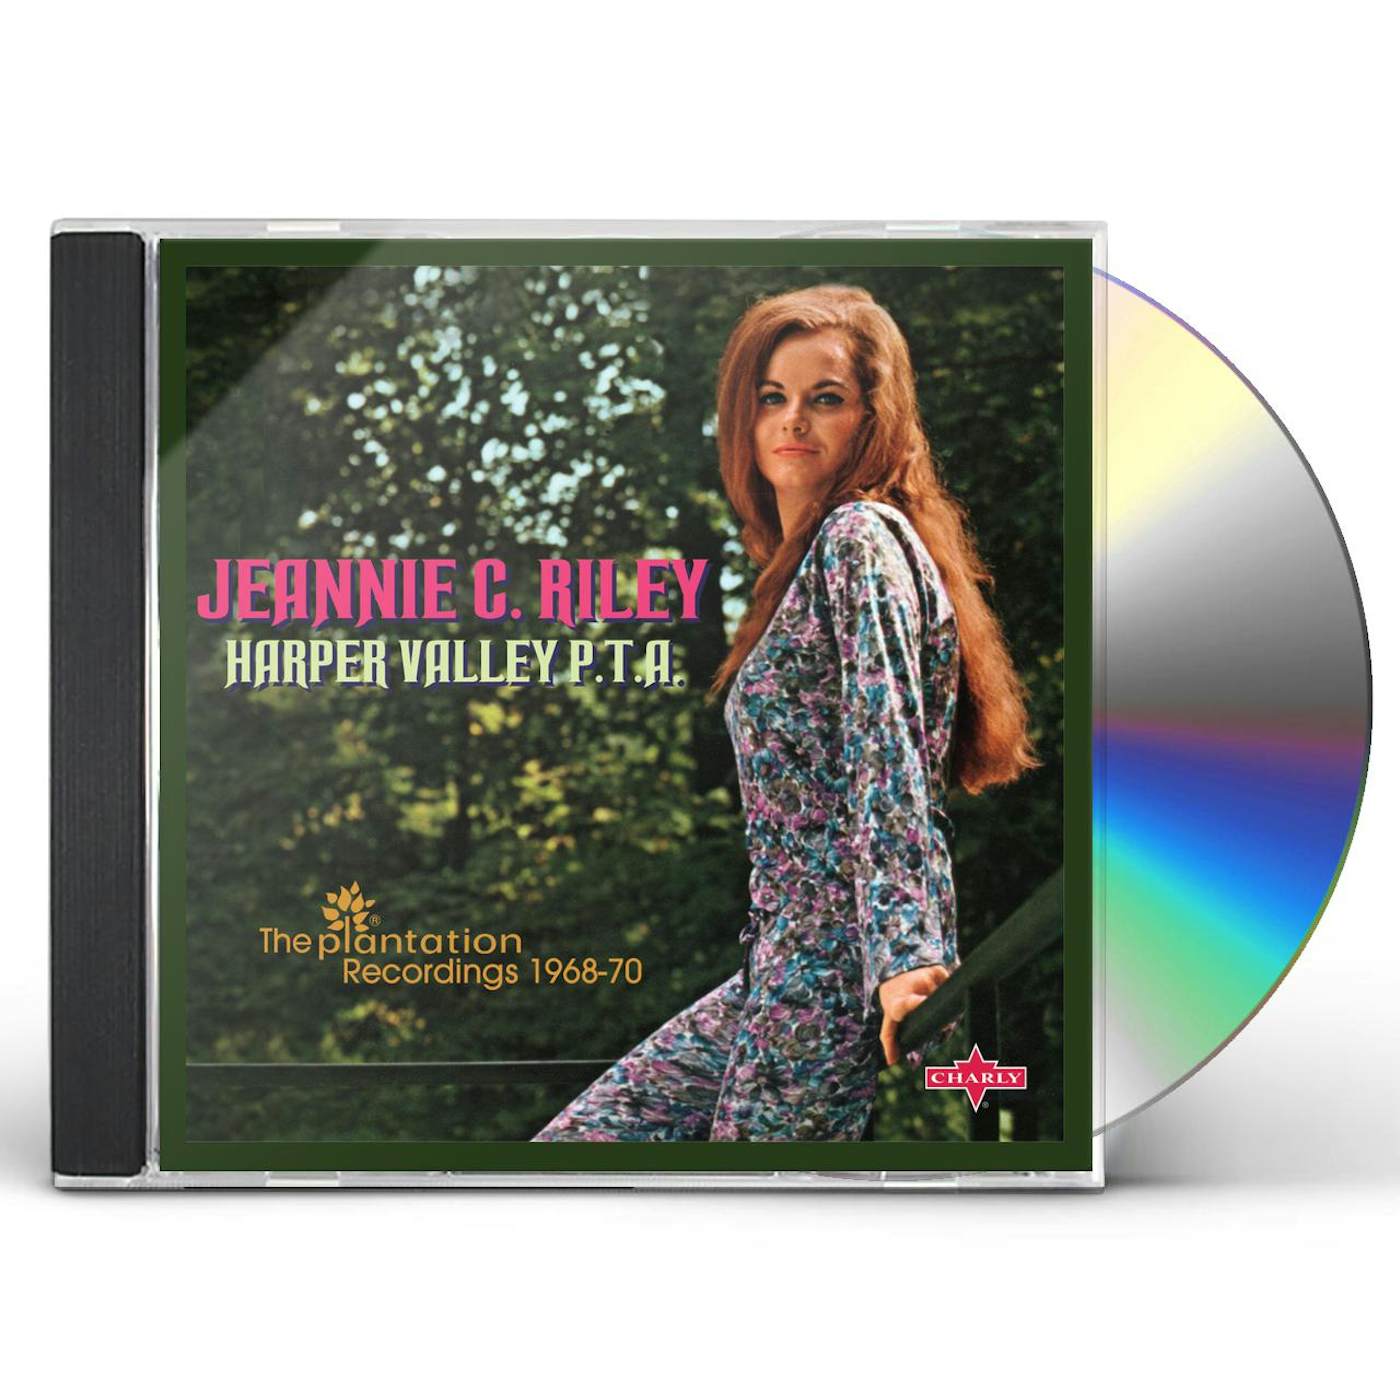 Jeannie C. Riley Harper Valley P.T.A.: The Plantation Recordings 1968-1970 CD